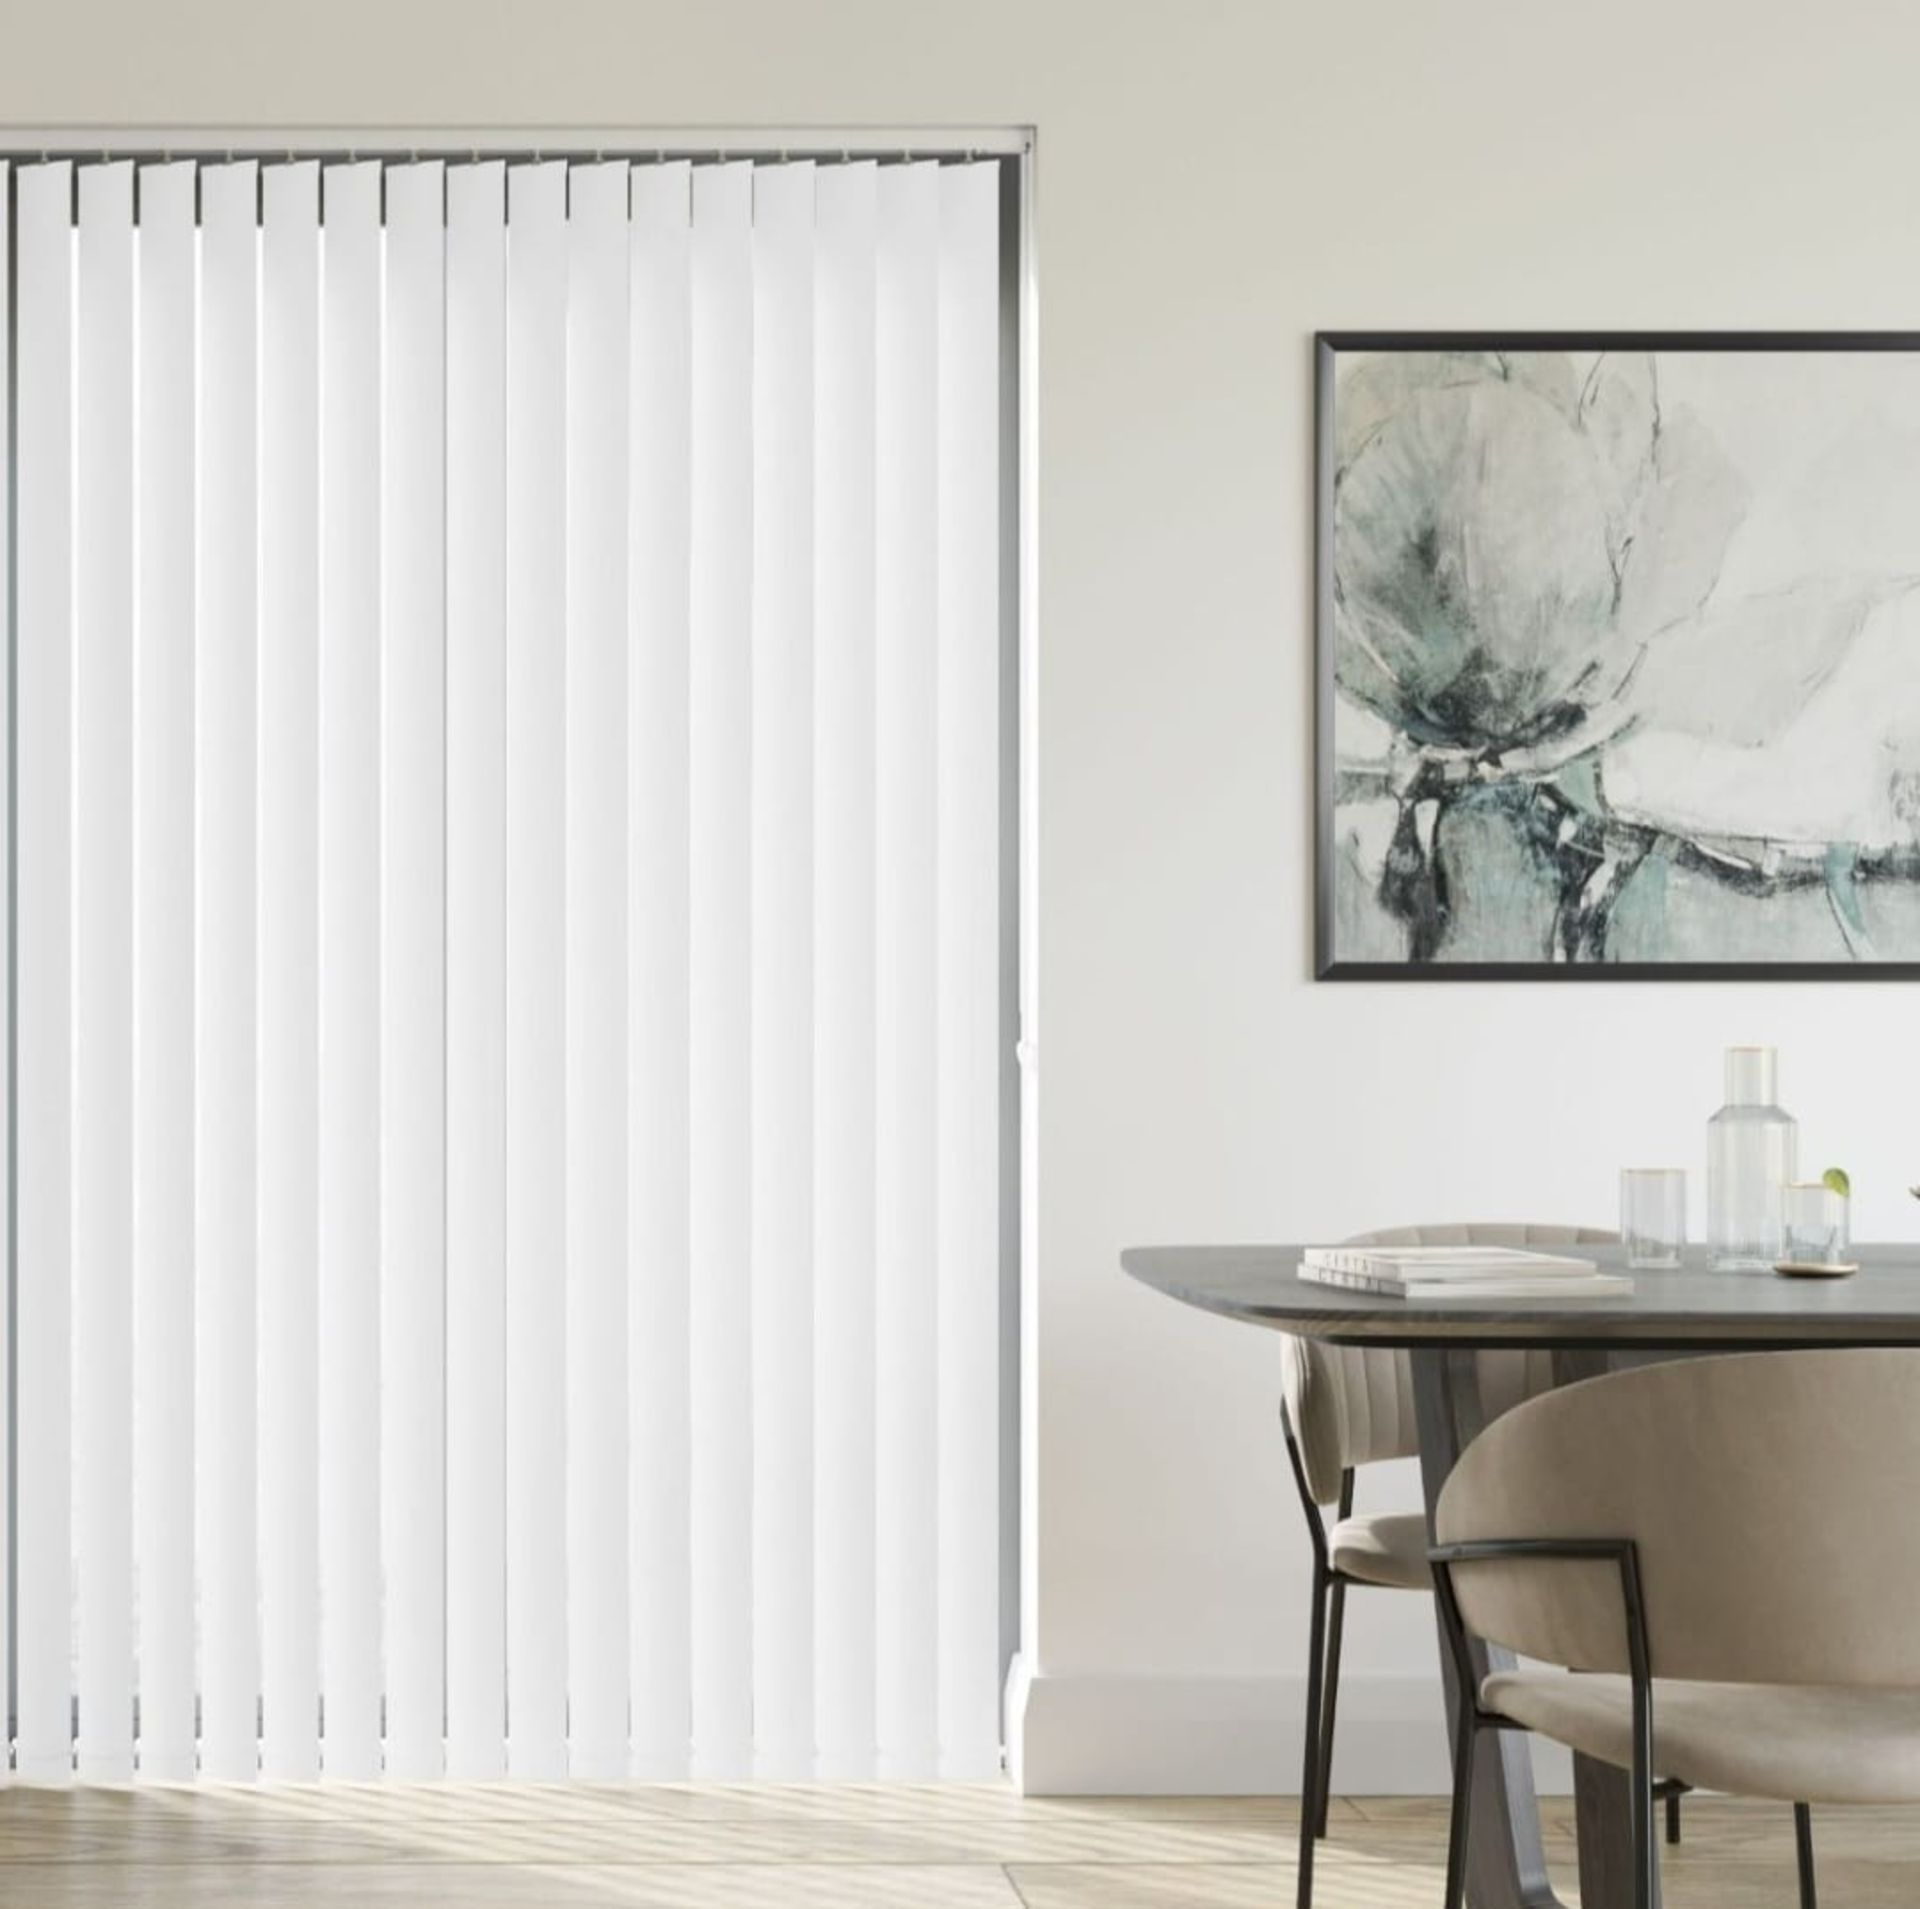 WHITE VERTICAL BLIND -COMPLETE WITH POLE & FITTINGS SIZES: 300 X 260 TOTAL RRP £165 - IMAGES ARE FOR